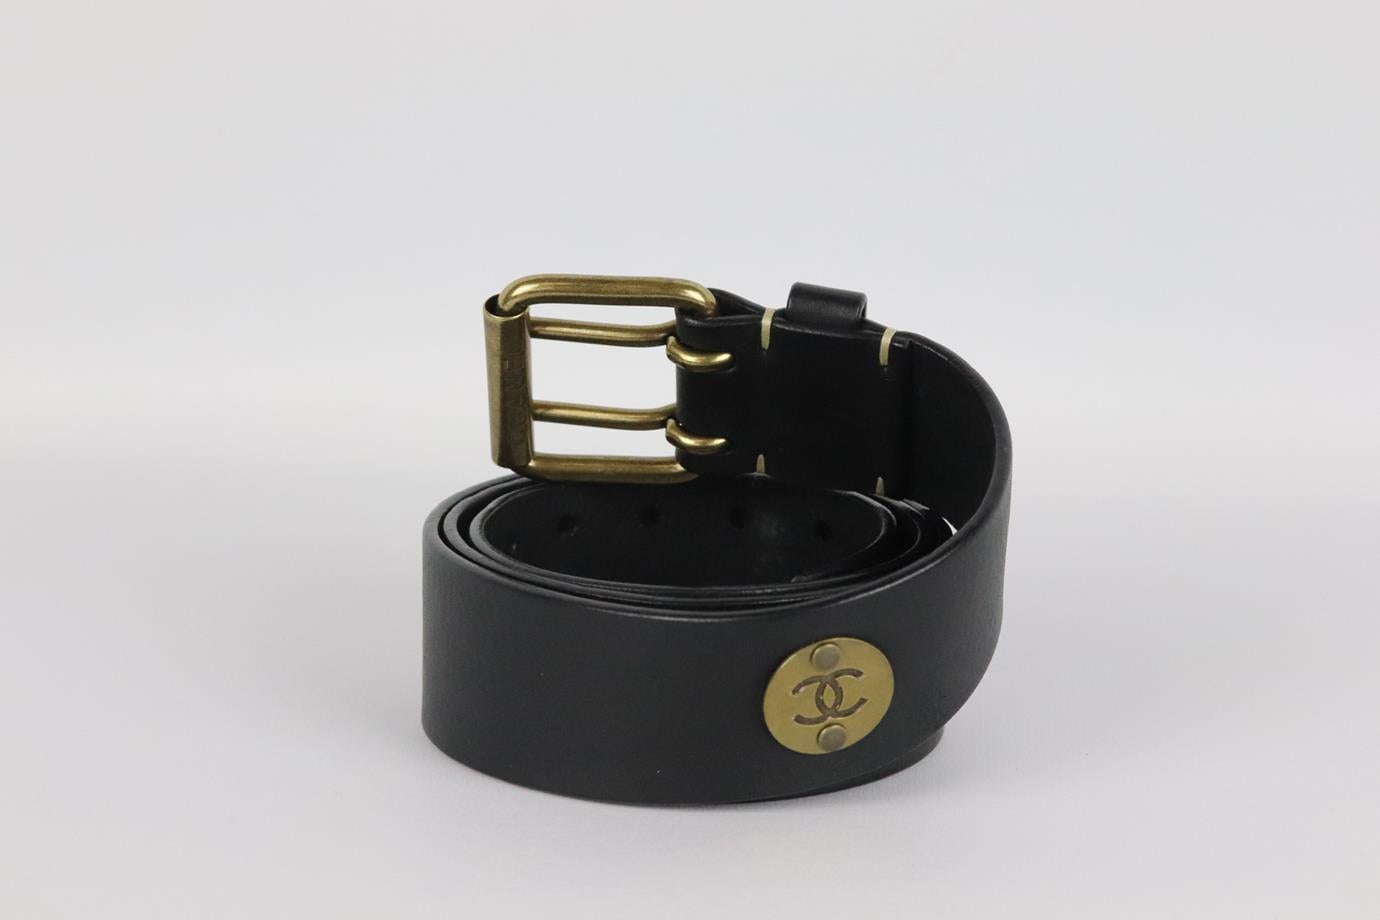 Chanel 2014 cc detailed leather waist belt. Black. Buckle fastening at front. Comes with dustbag. Size: 95. Min. Length: 36 in. Max. Length: 40 in. Very good condition - Light signs of wear; see pictures.